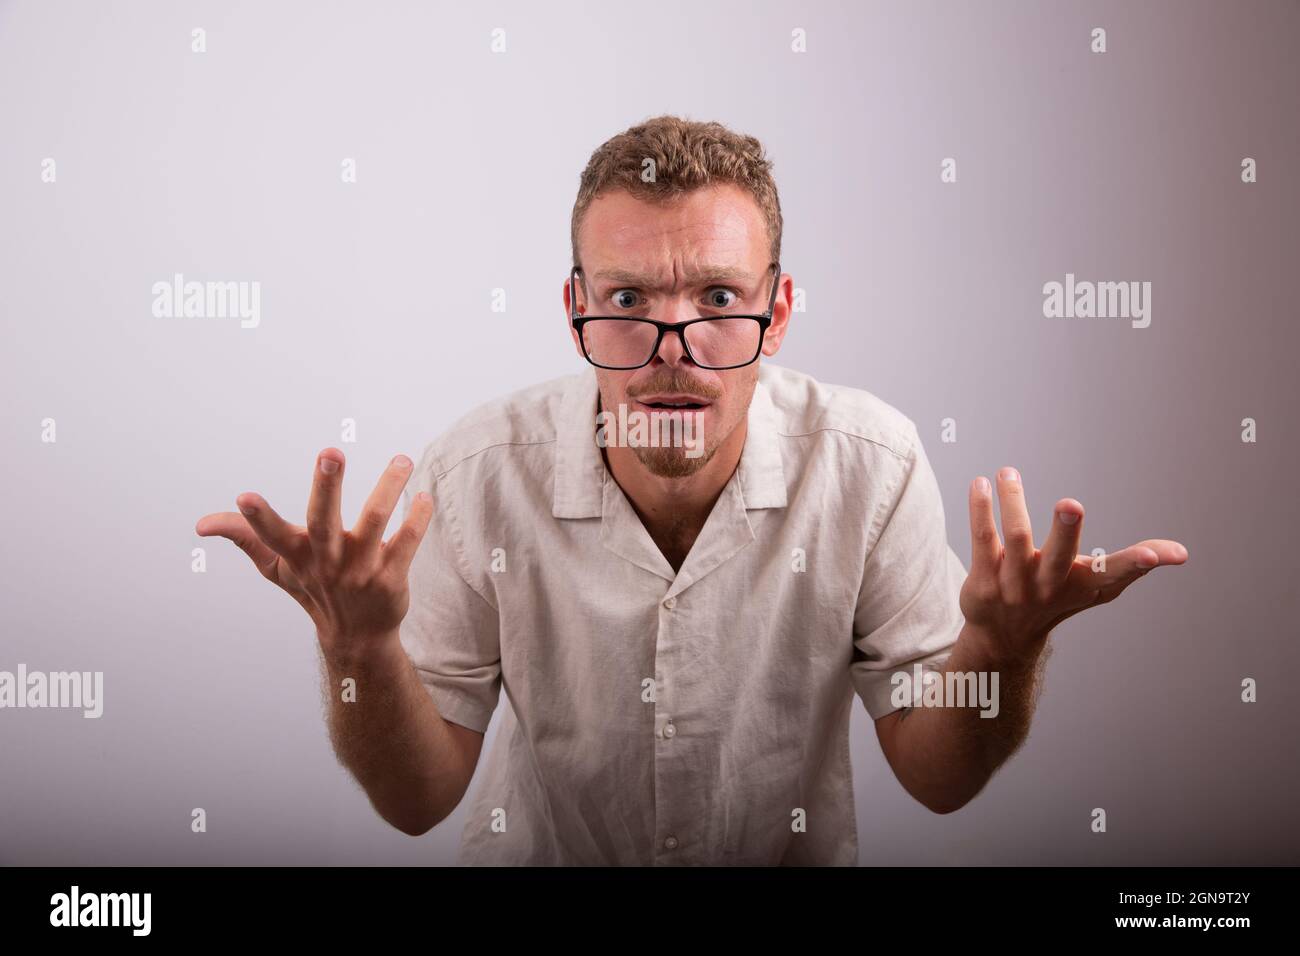 Man with surprised expression, guy with astonished face and raised arms. Nerd person with eyeglasses, millennial person Stock Photo